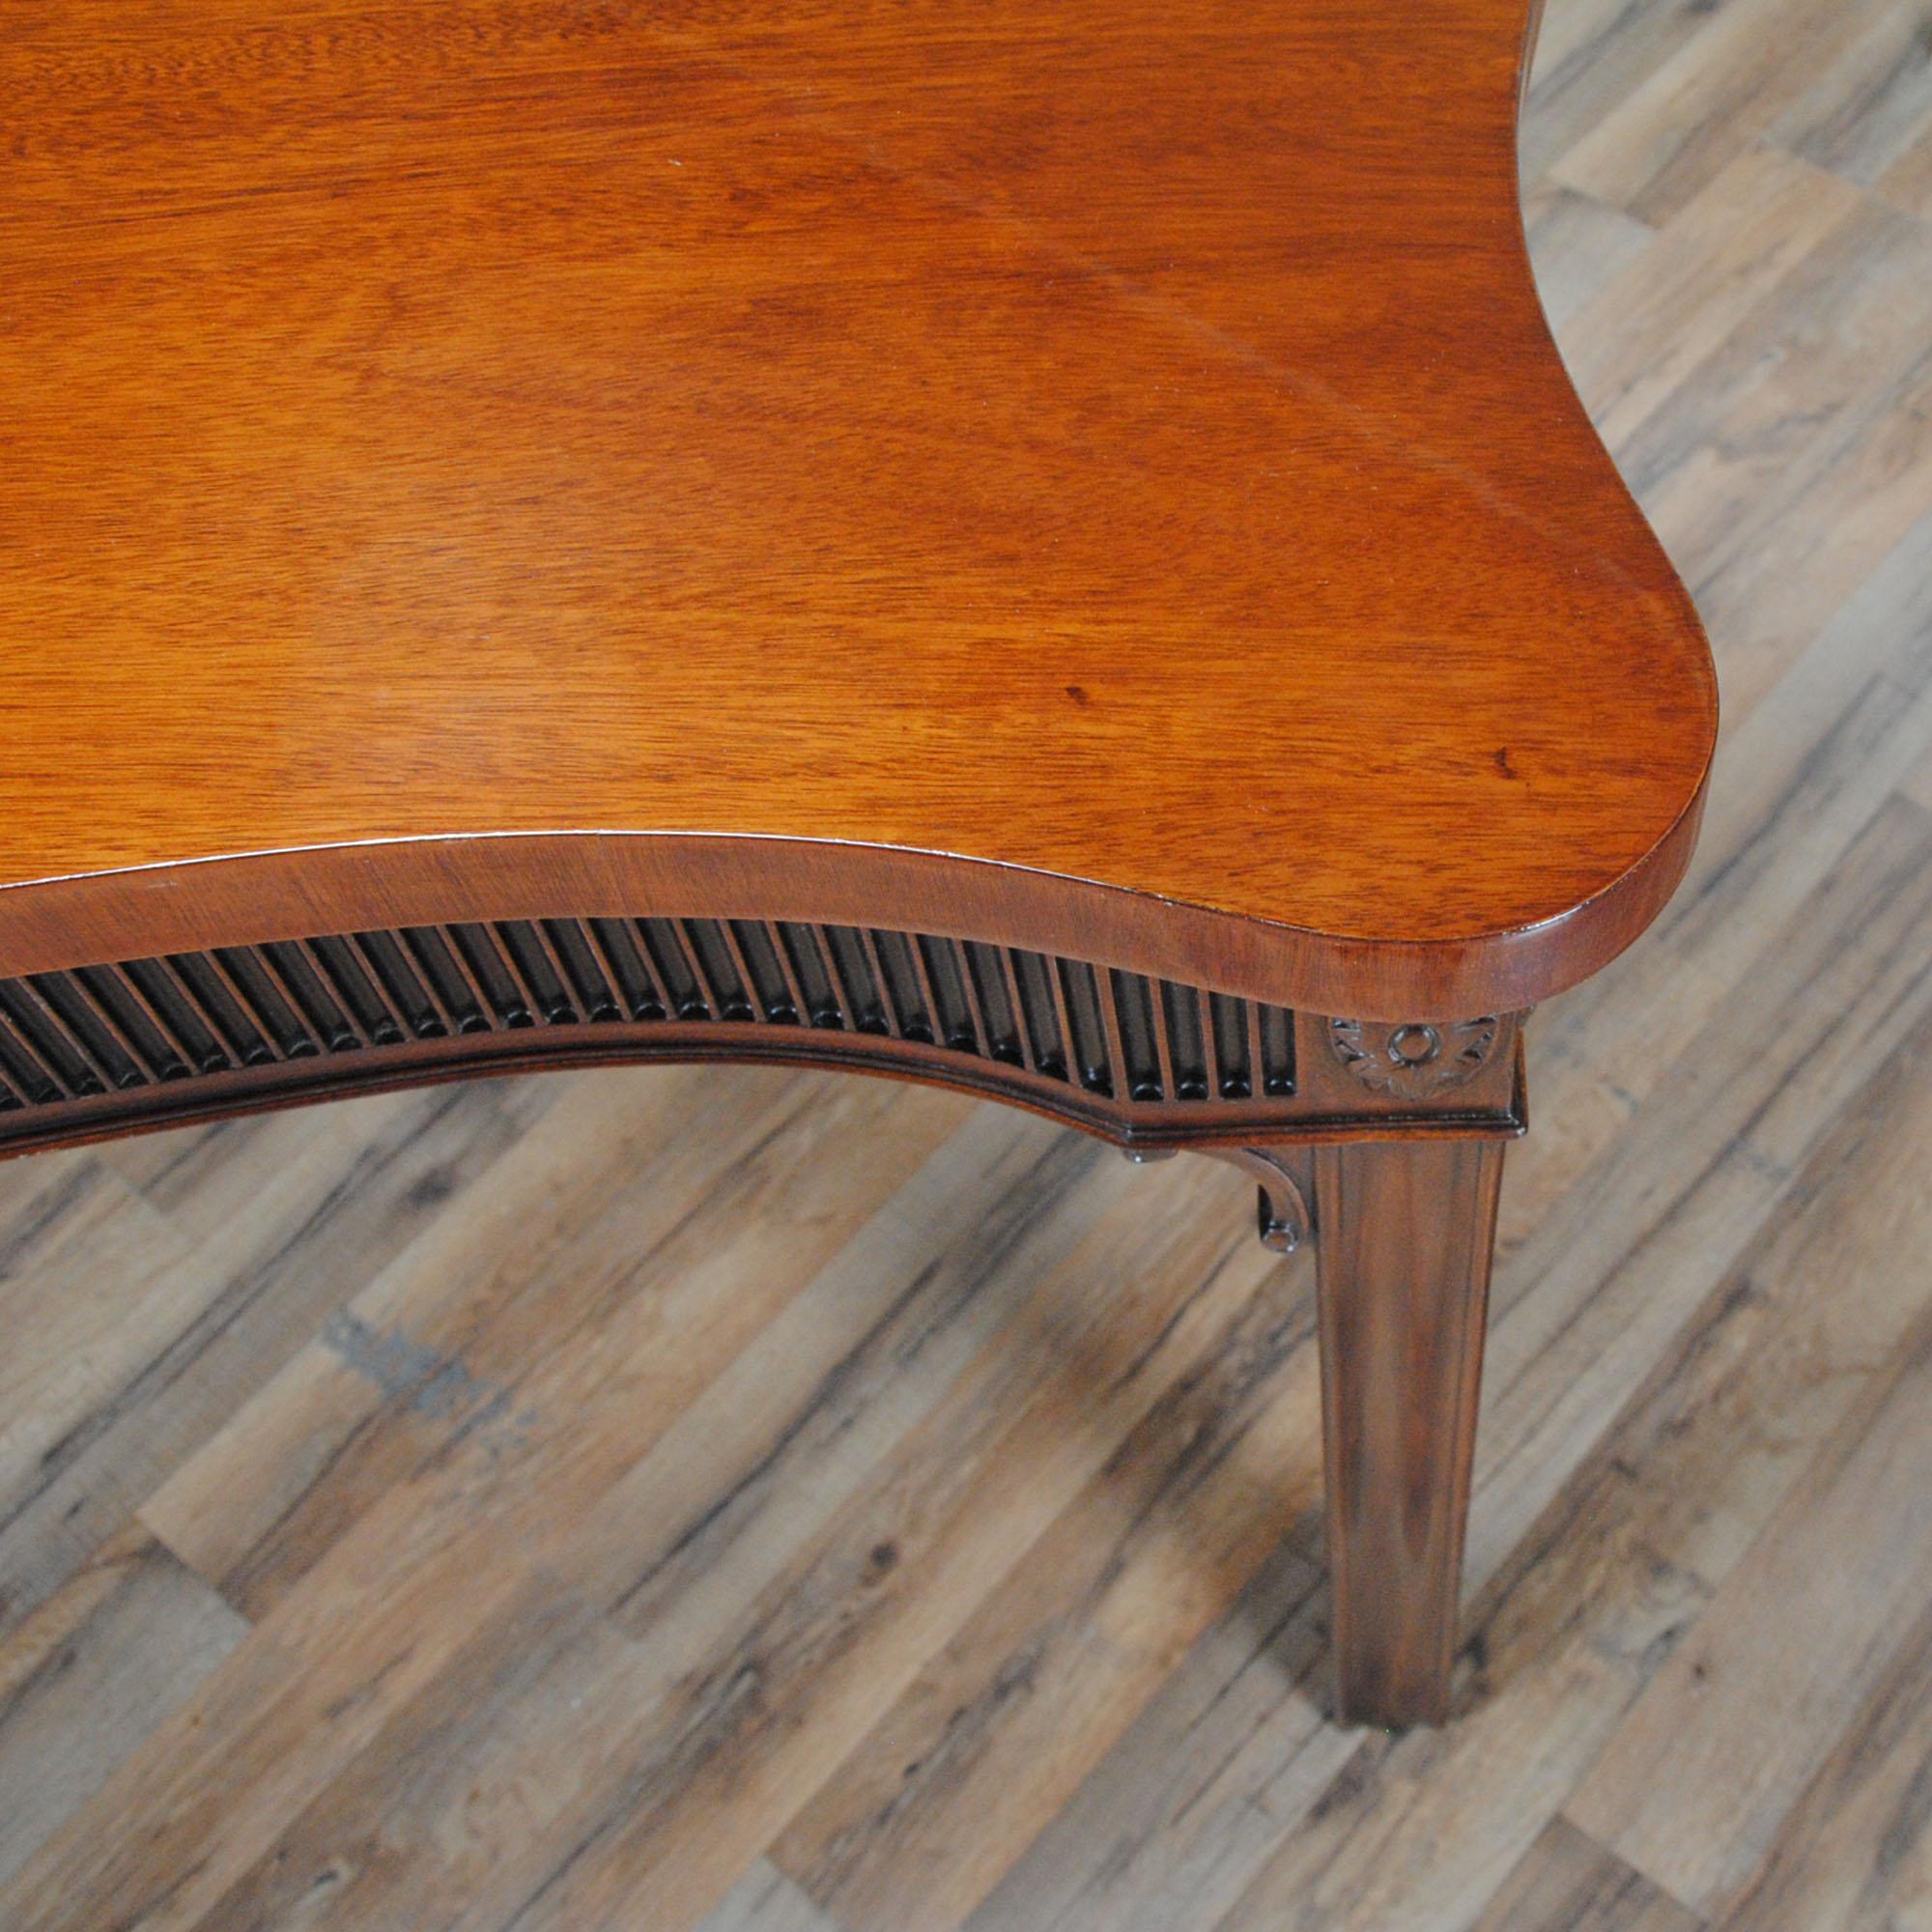 Vintage Kittinger Mahogany Console In Good Condition For Sale In Annville, PA